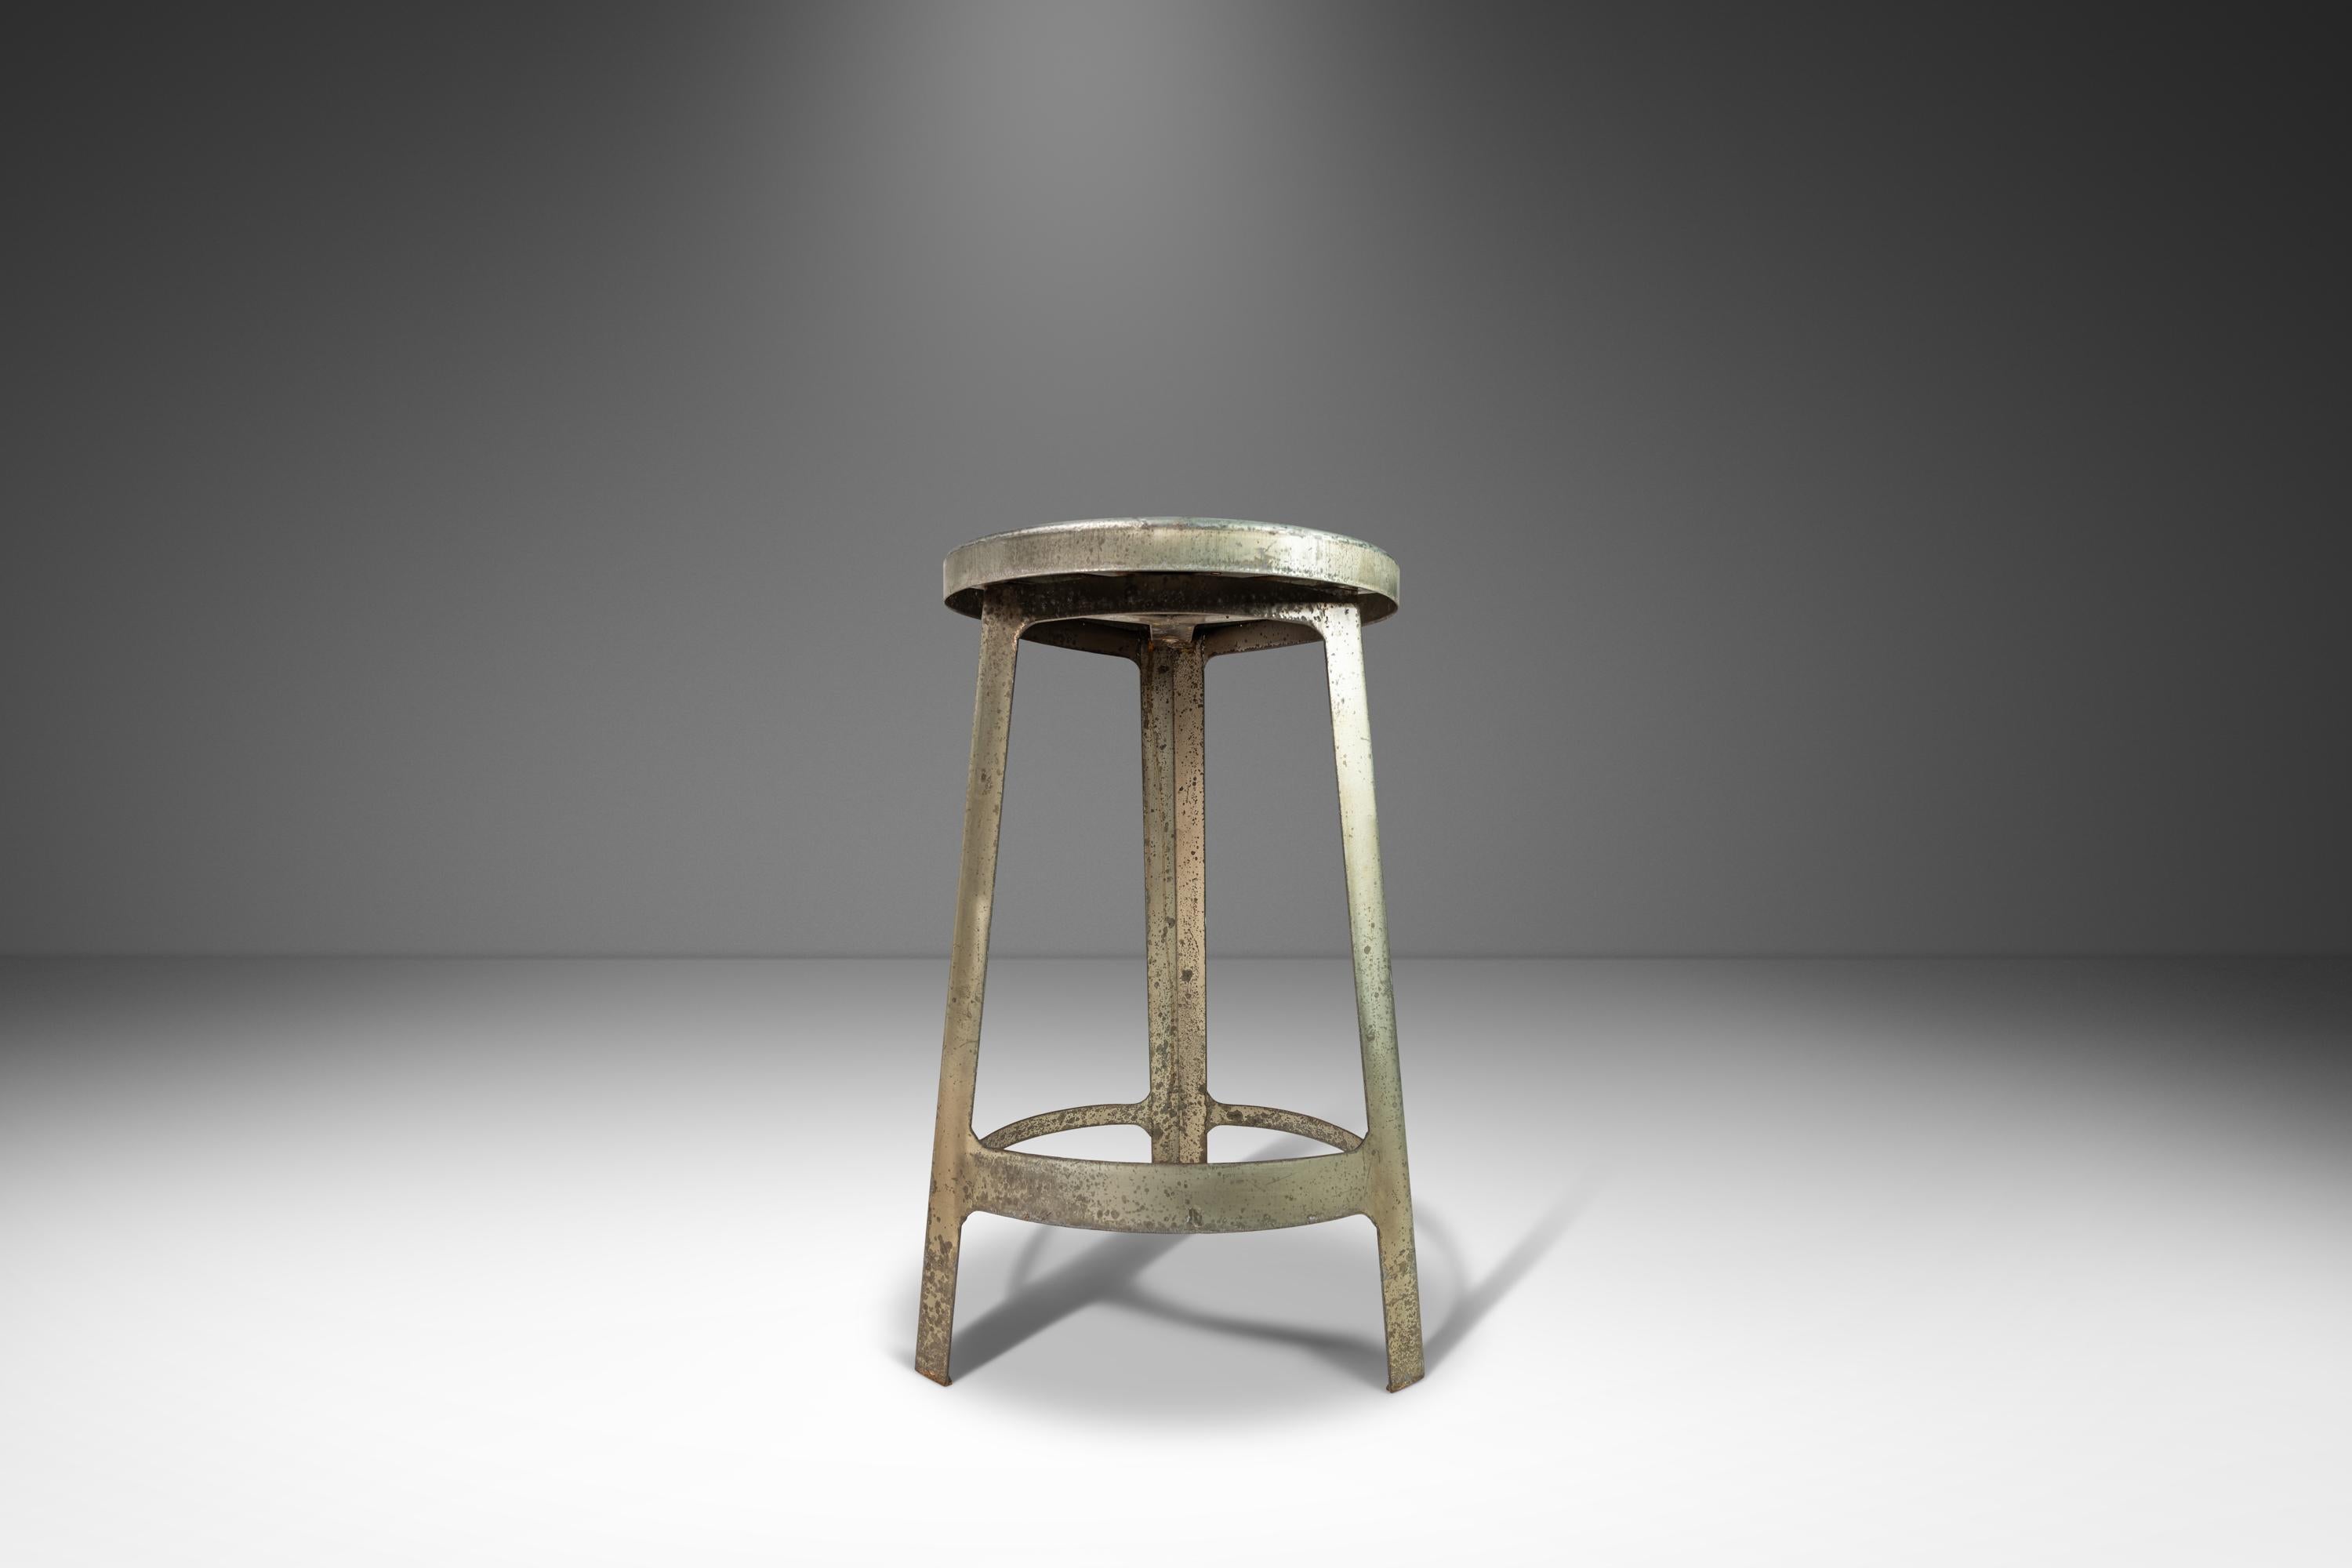 Aluminum Set of Four '4' Hammered Industrial Counter Height Bar Stools, France, C. 1950s